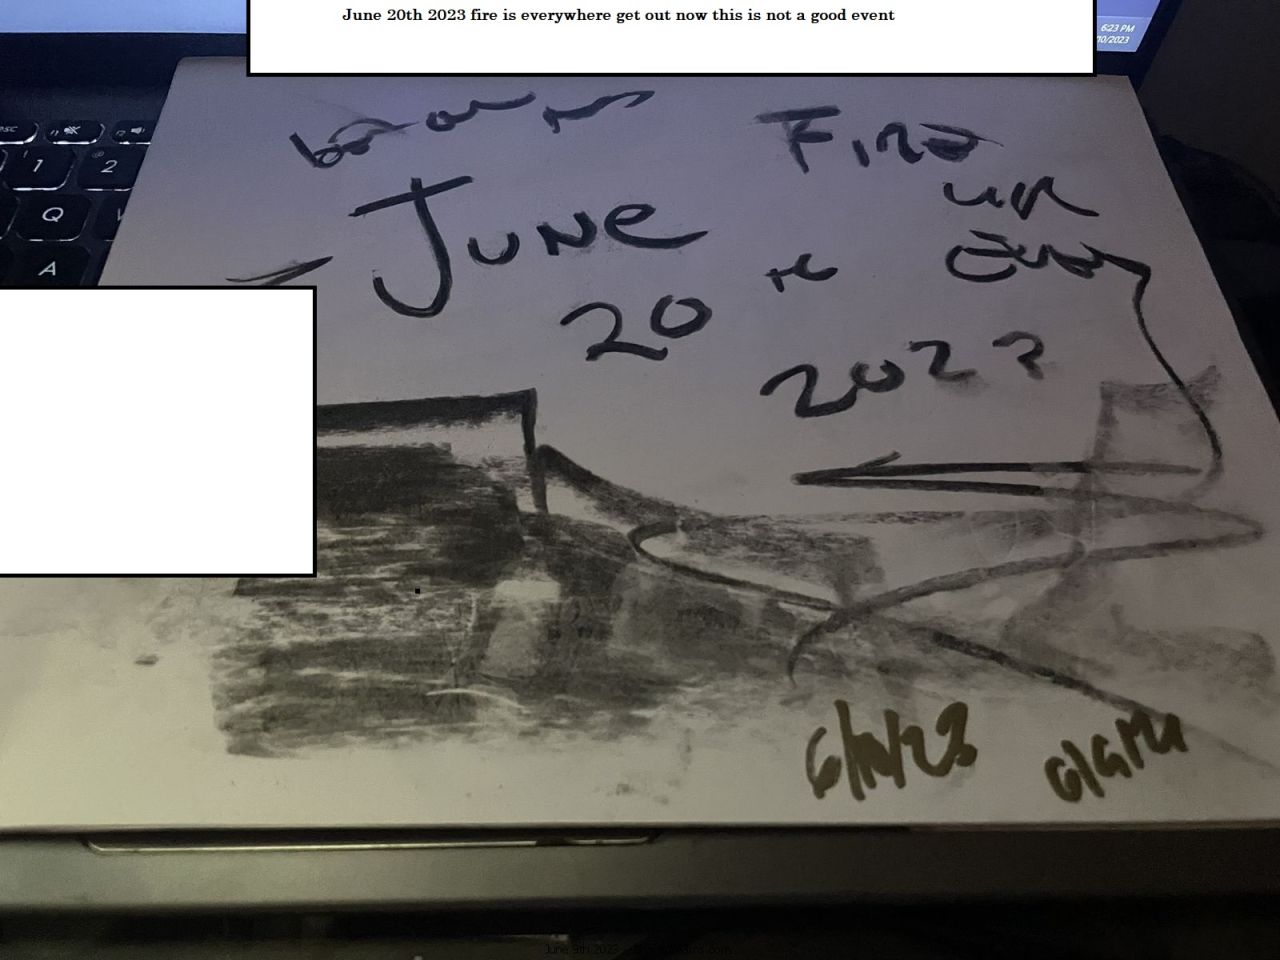 9 June 2023 1  June 20th 2023 fire additional details are on the dream drawing.
June 20th 2023 fire additional details are on the dream drawing.
